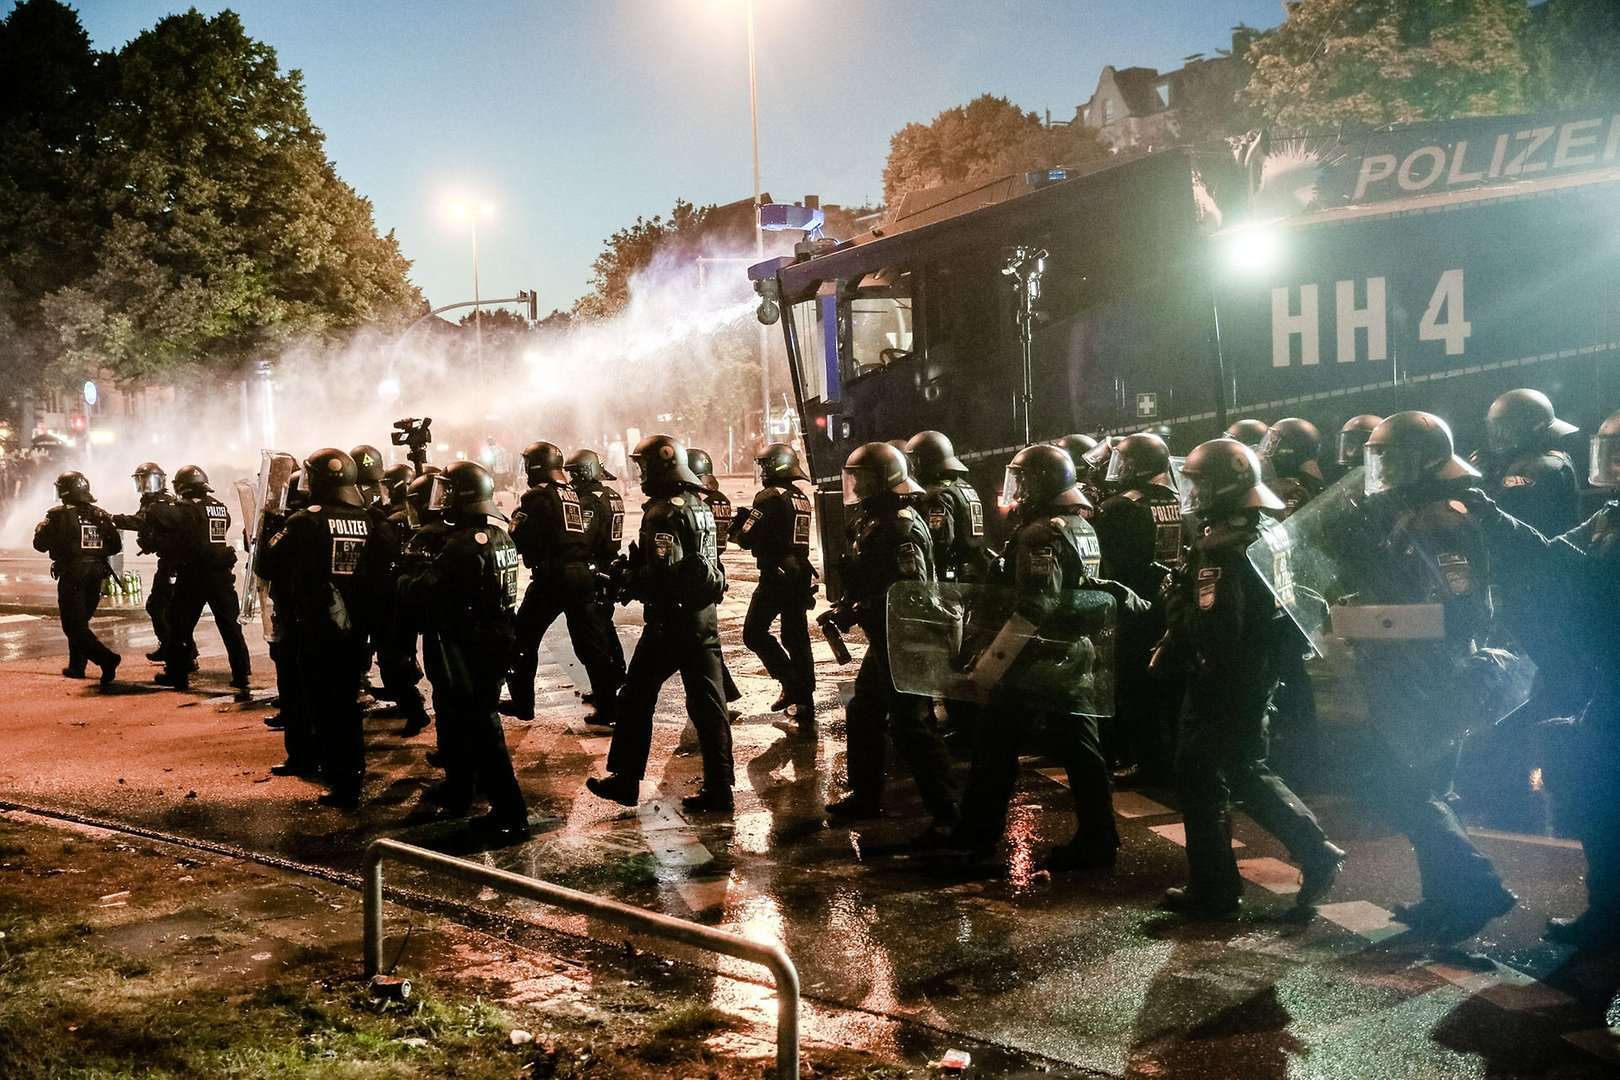 Confronting Escalating Repression in Germany: In the Aftermath of the G20, a Call for Resistance from the Rigaer 94